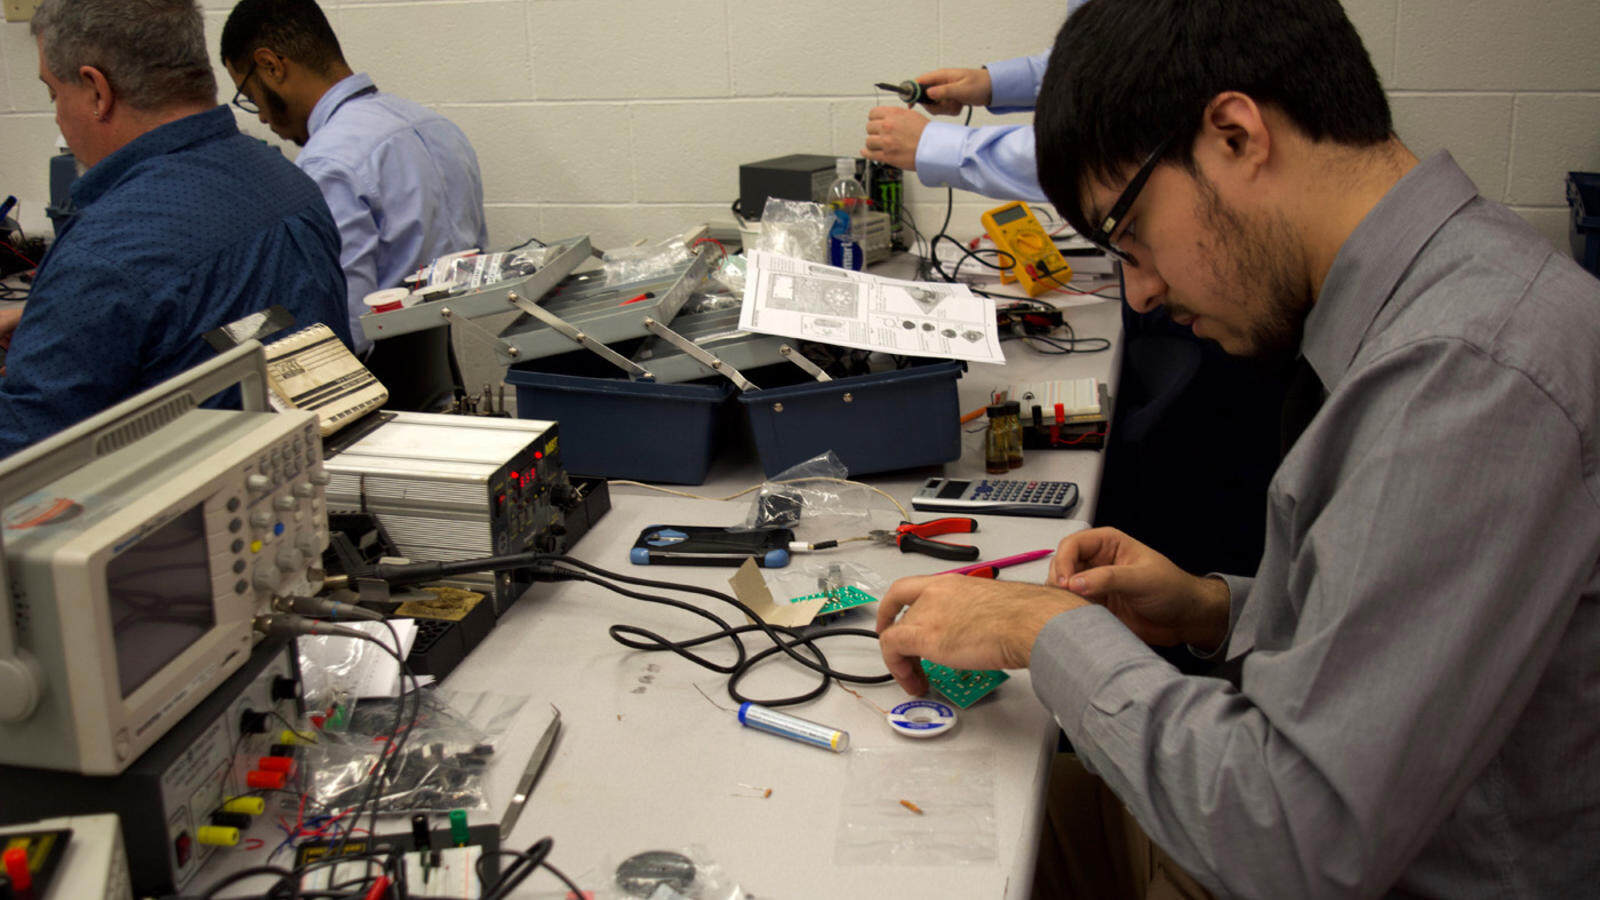 An Allentown electronics tech student prepares a circuit board for soldering.